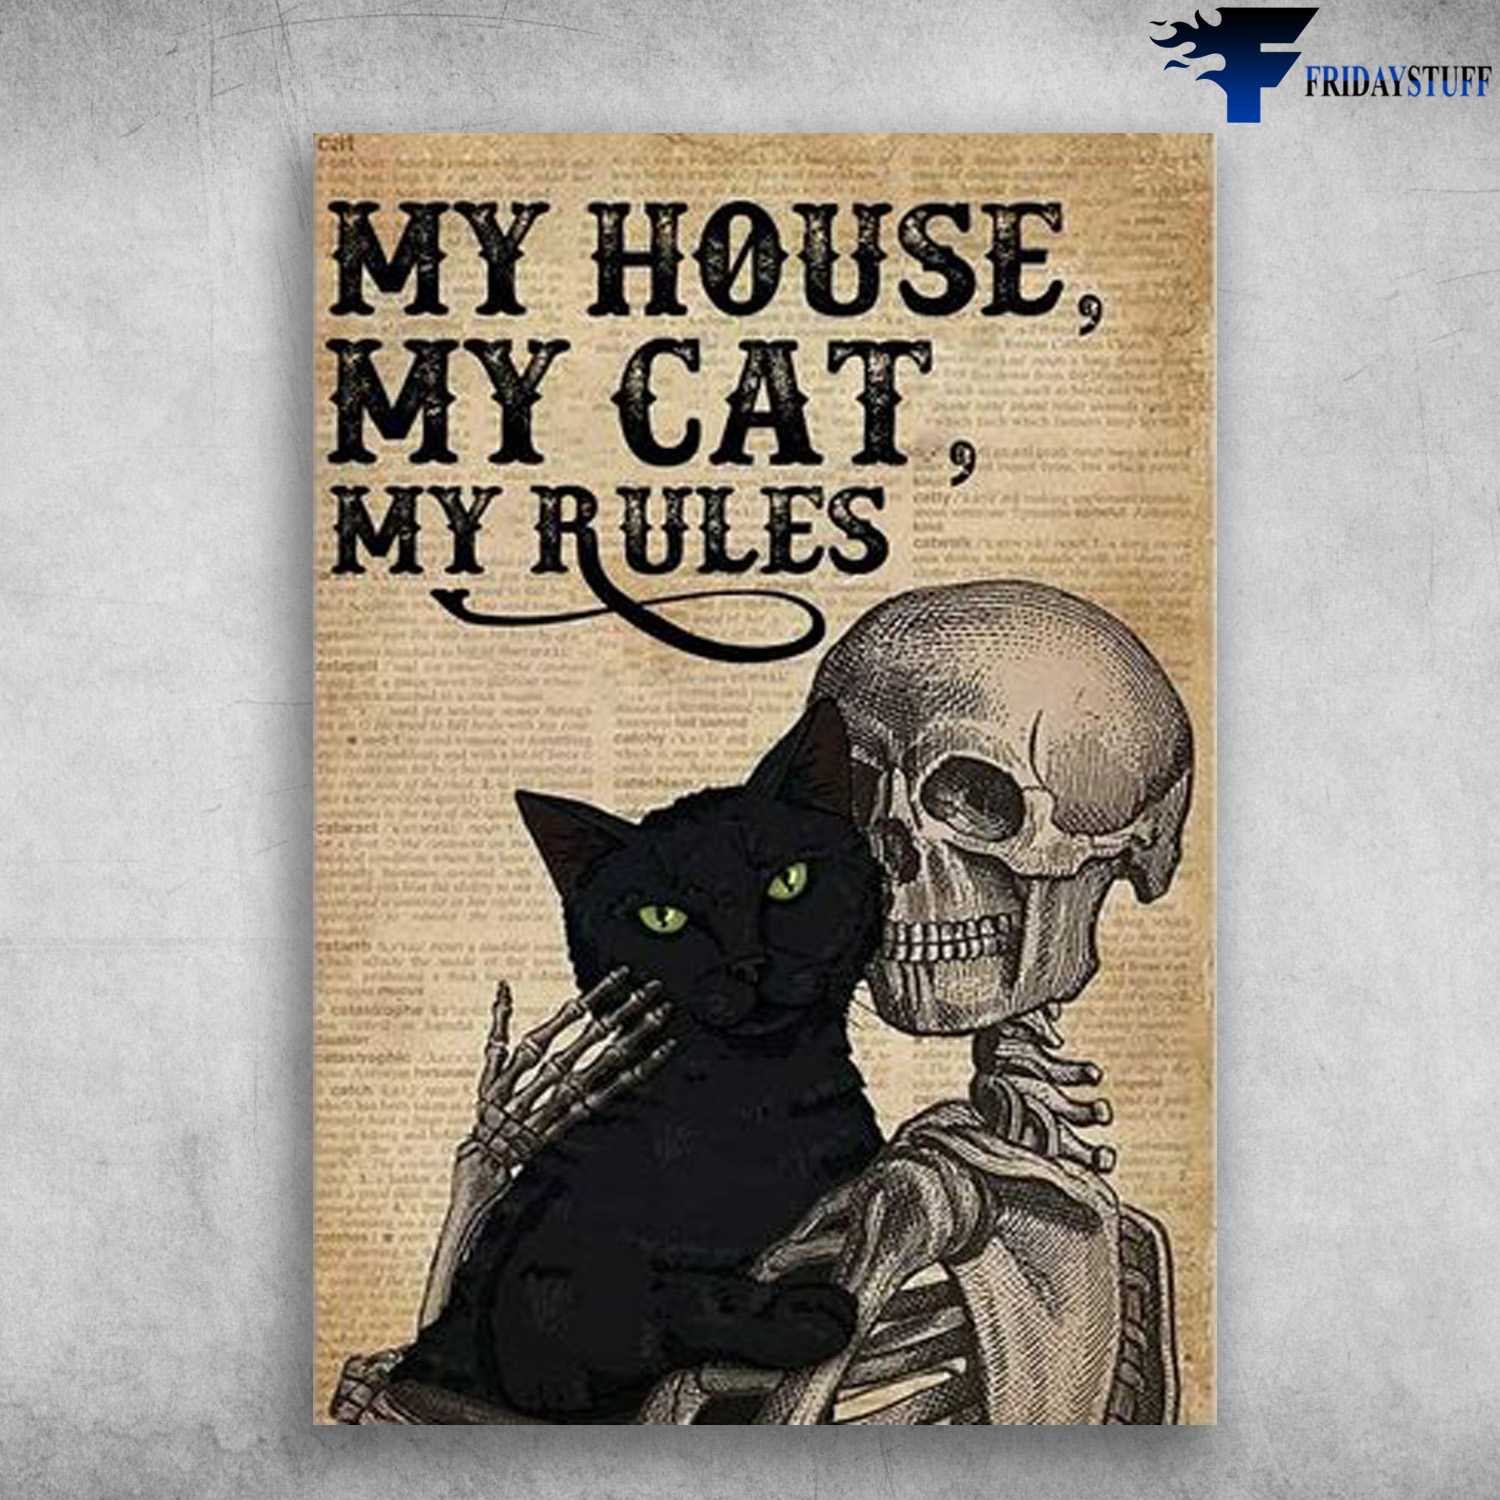 Black Cat, Cat Lover, Skeleton And Cat, My House, My Cat, My Rules